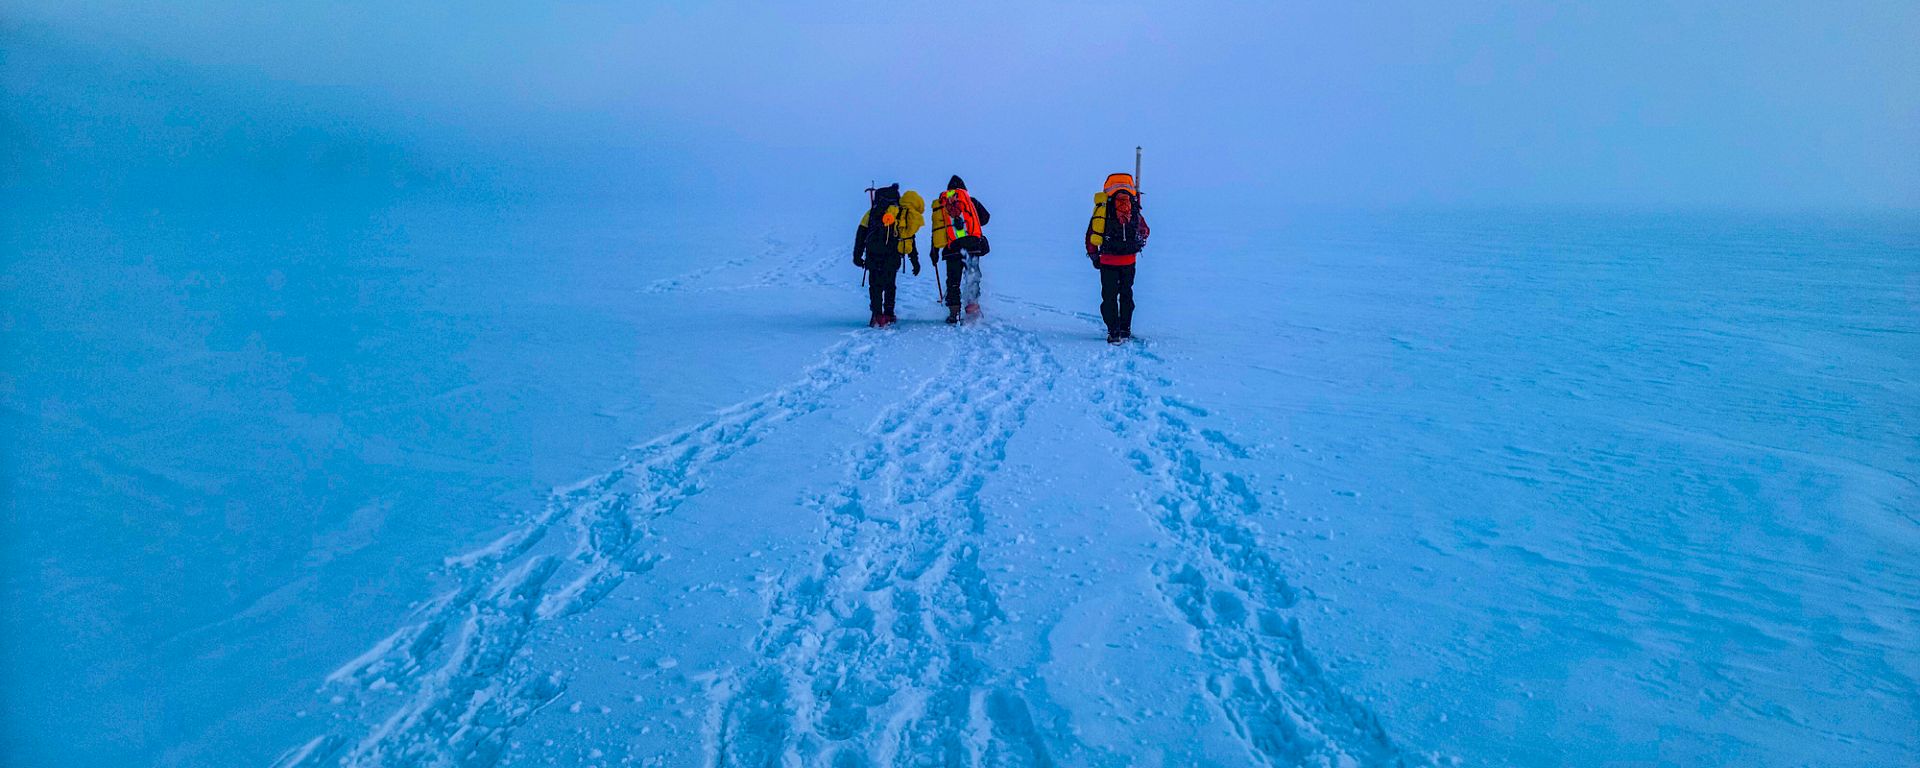 3 expeditioners walk into the distance in an icy, misty landscape.